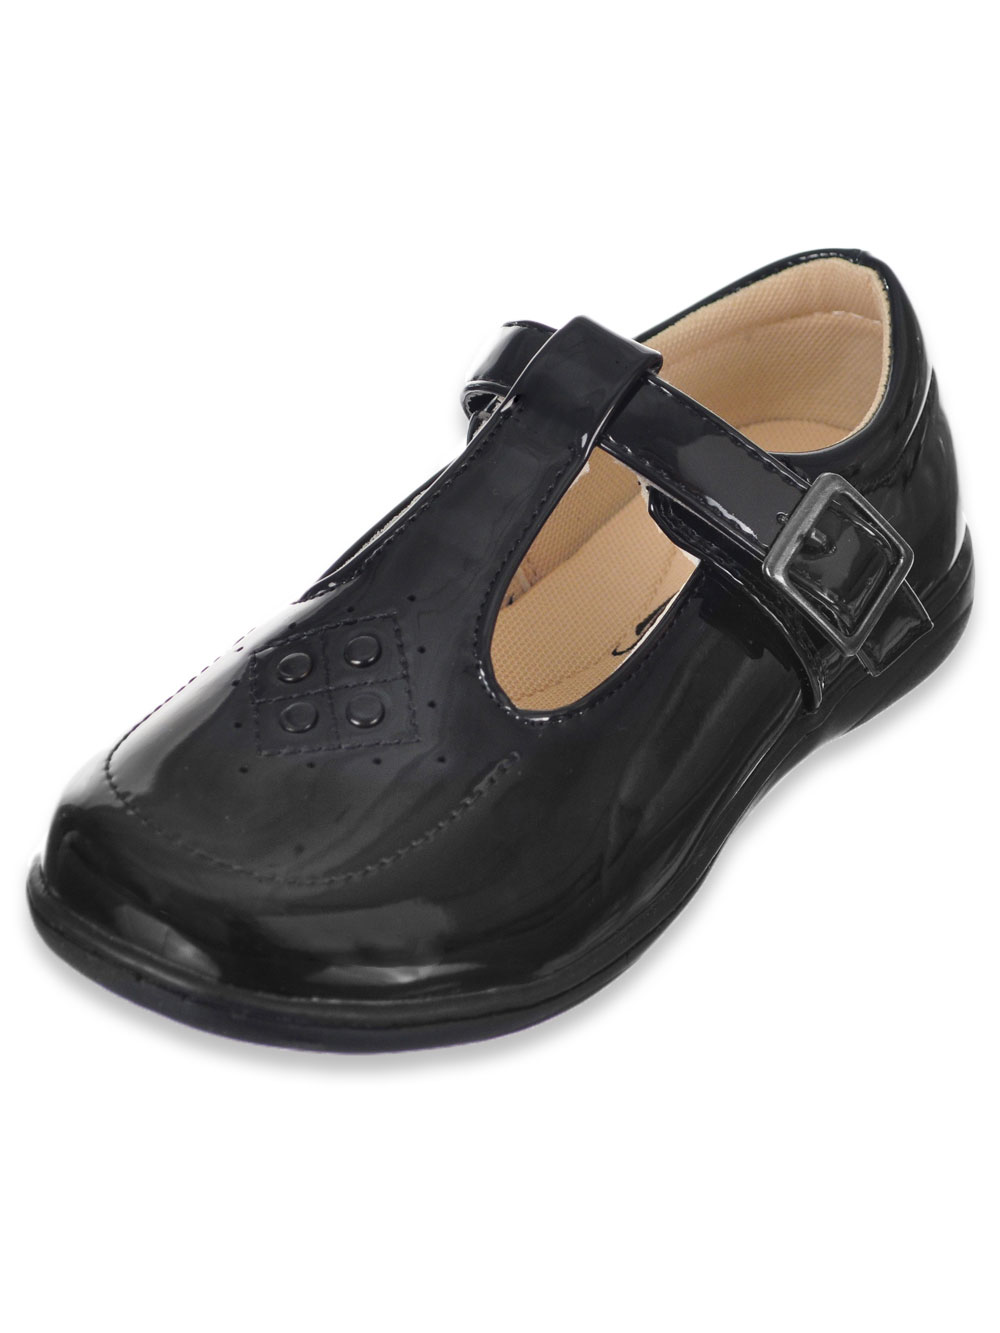 comfortable black mary jane shoes